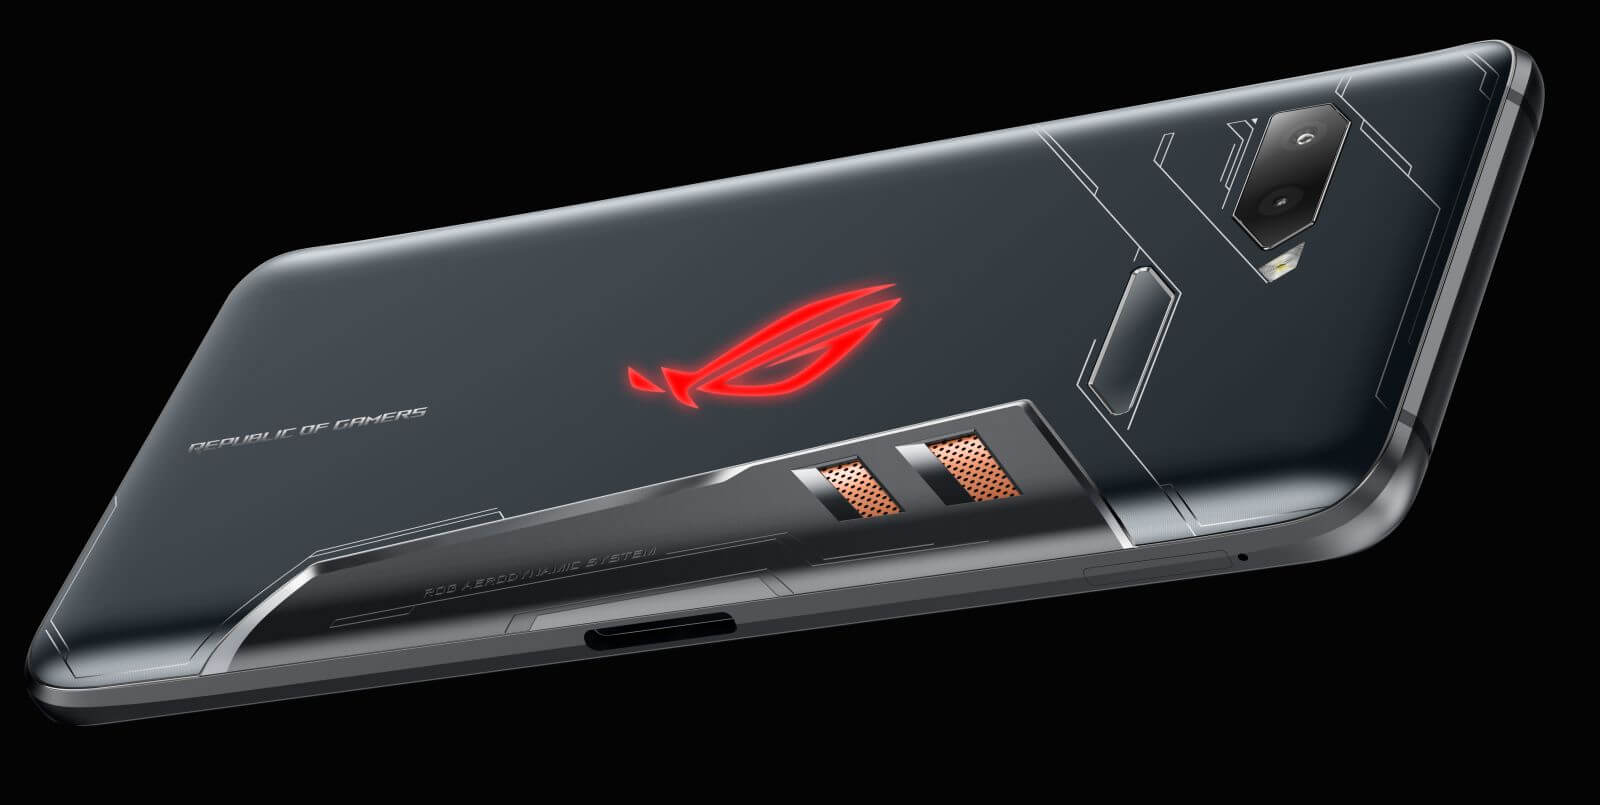 The Asus ROG Phone has a 90Hz screen, overclocked CPU, and vapor cooling